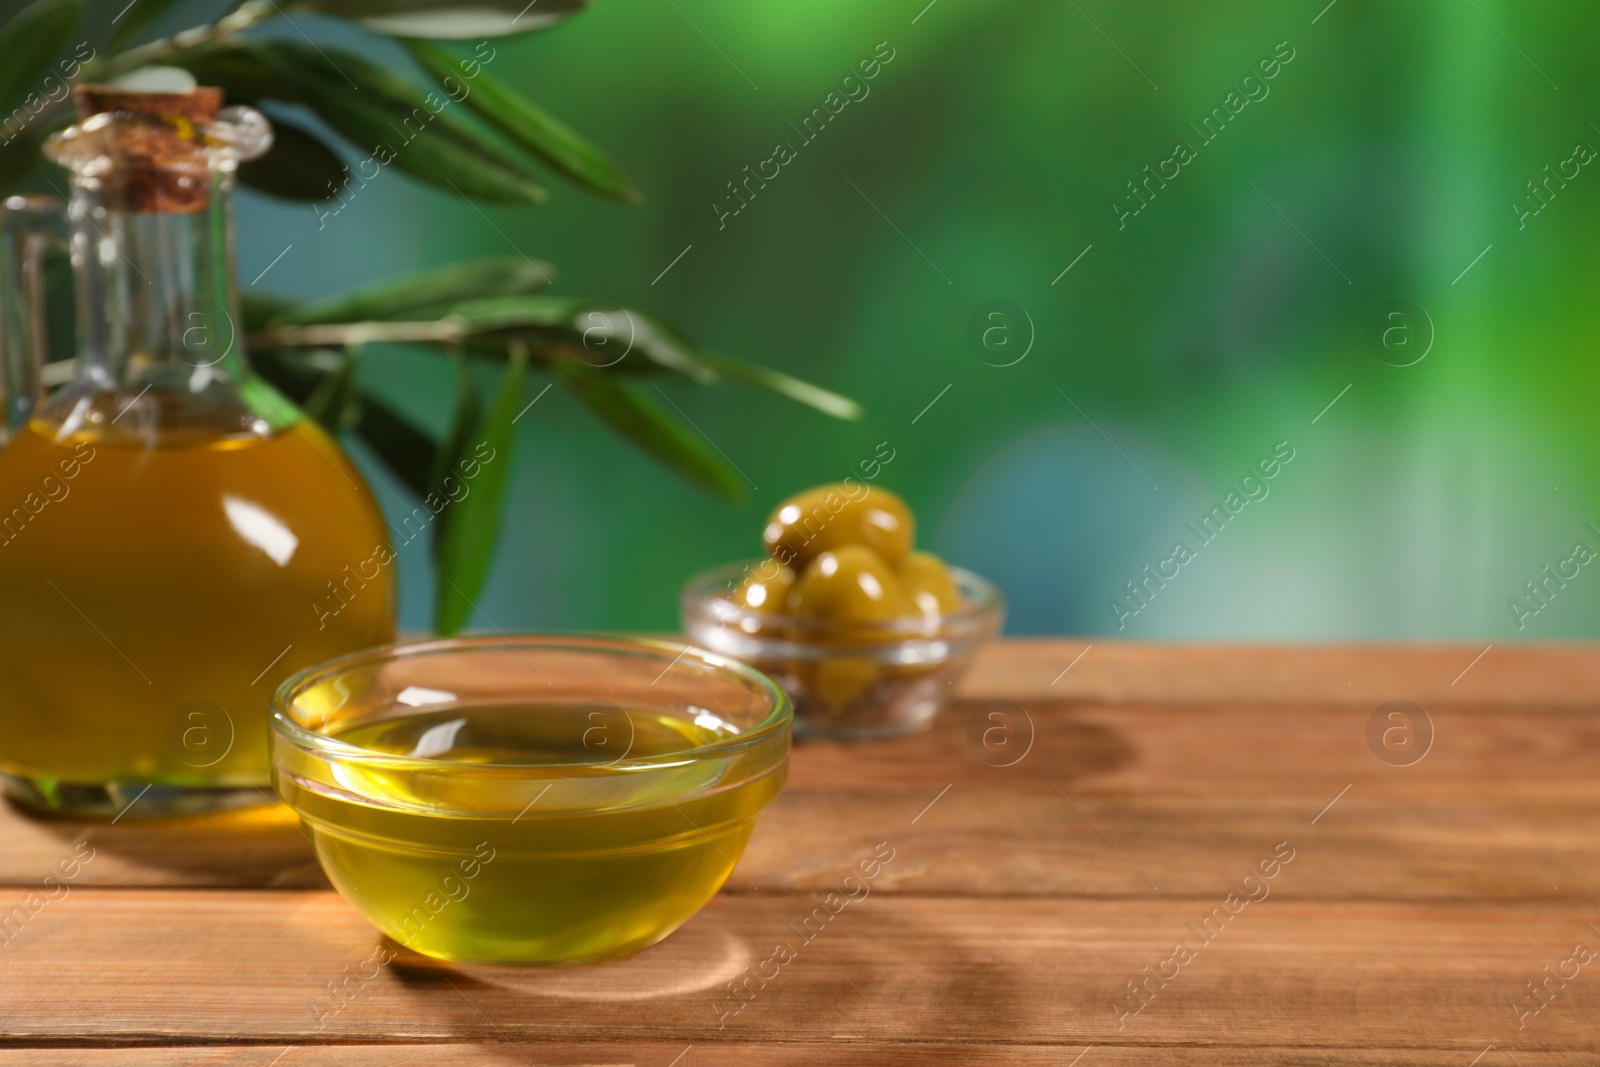 Photo of Cooking oil, olives and green leaves on wooden table against blurred background. Space for text